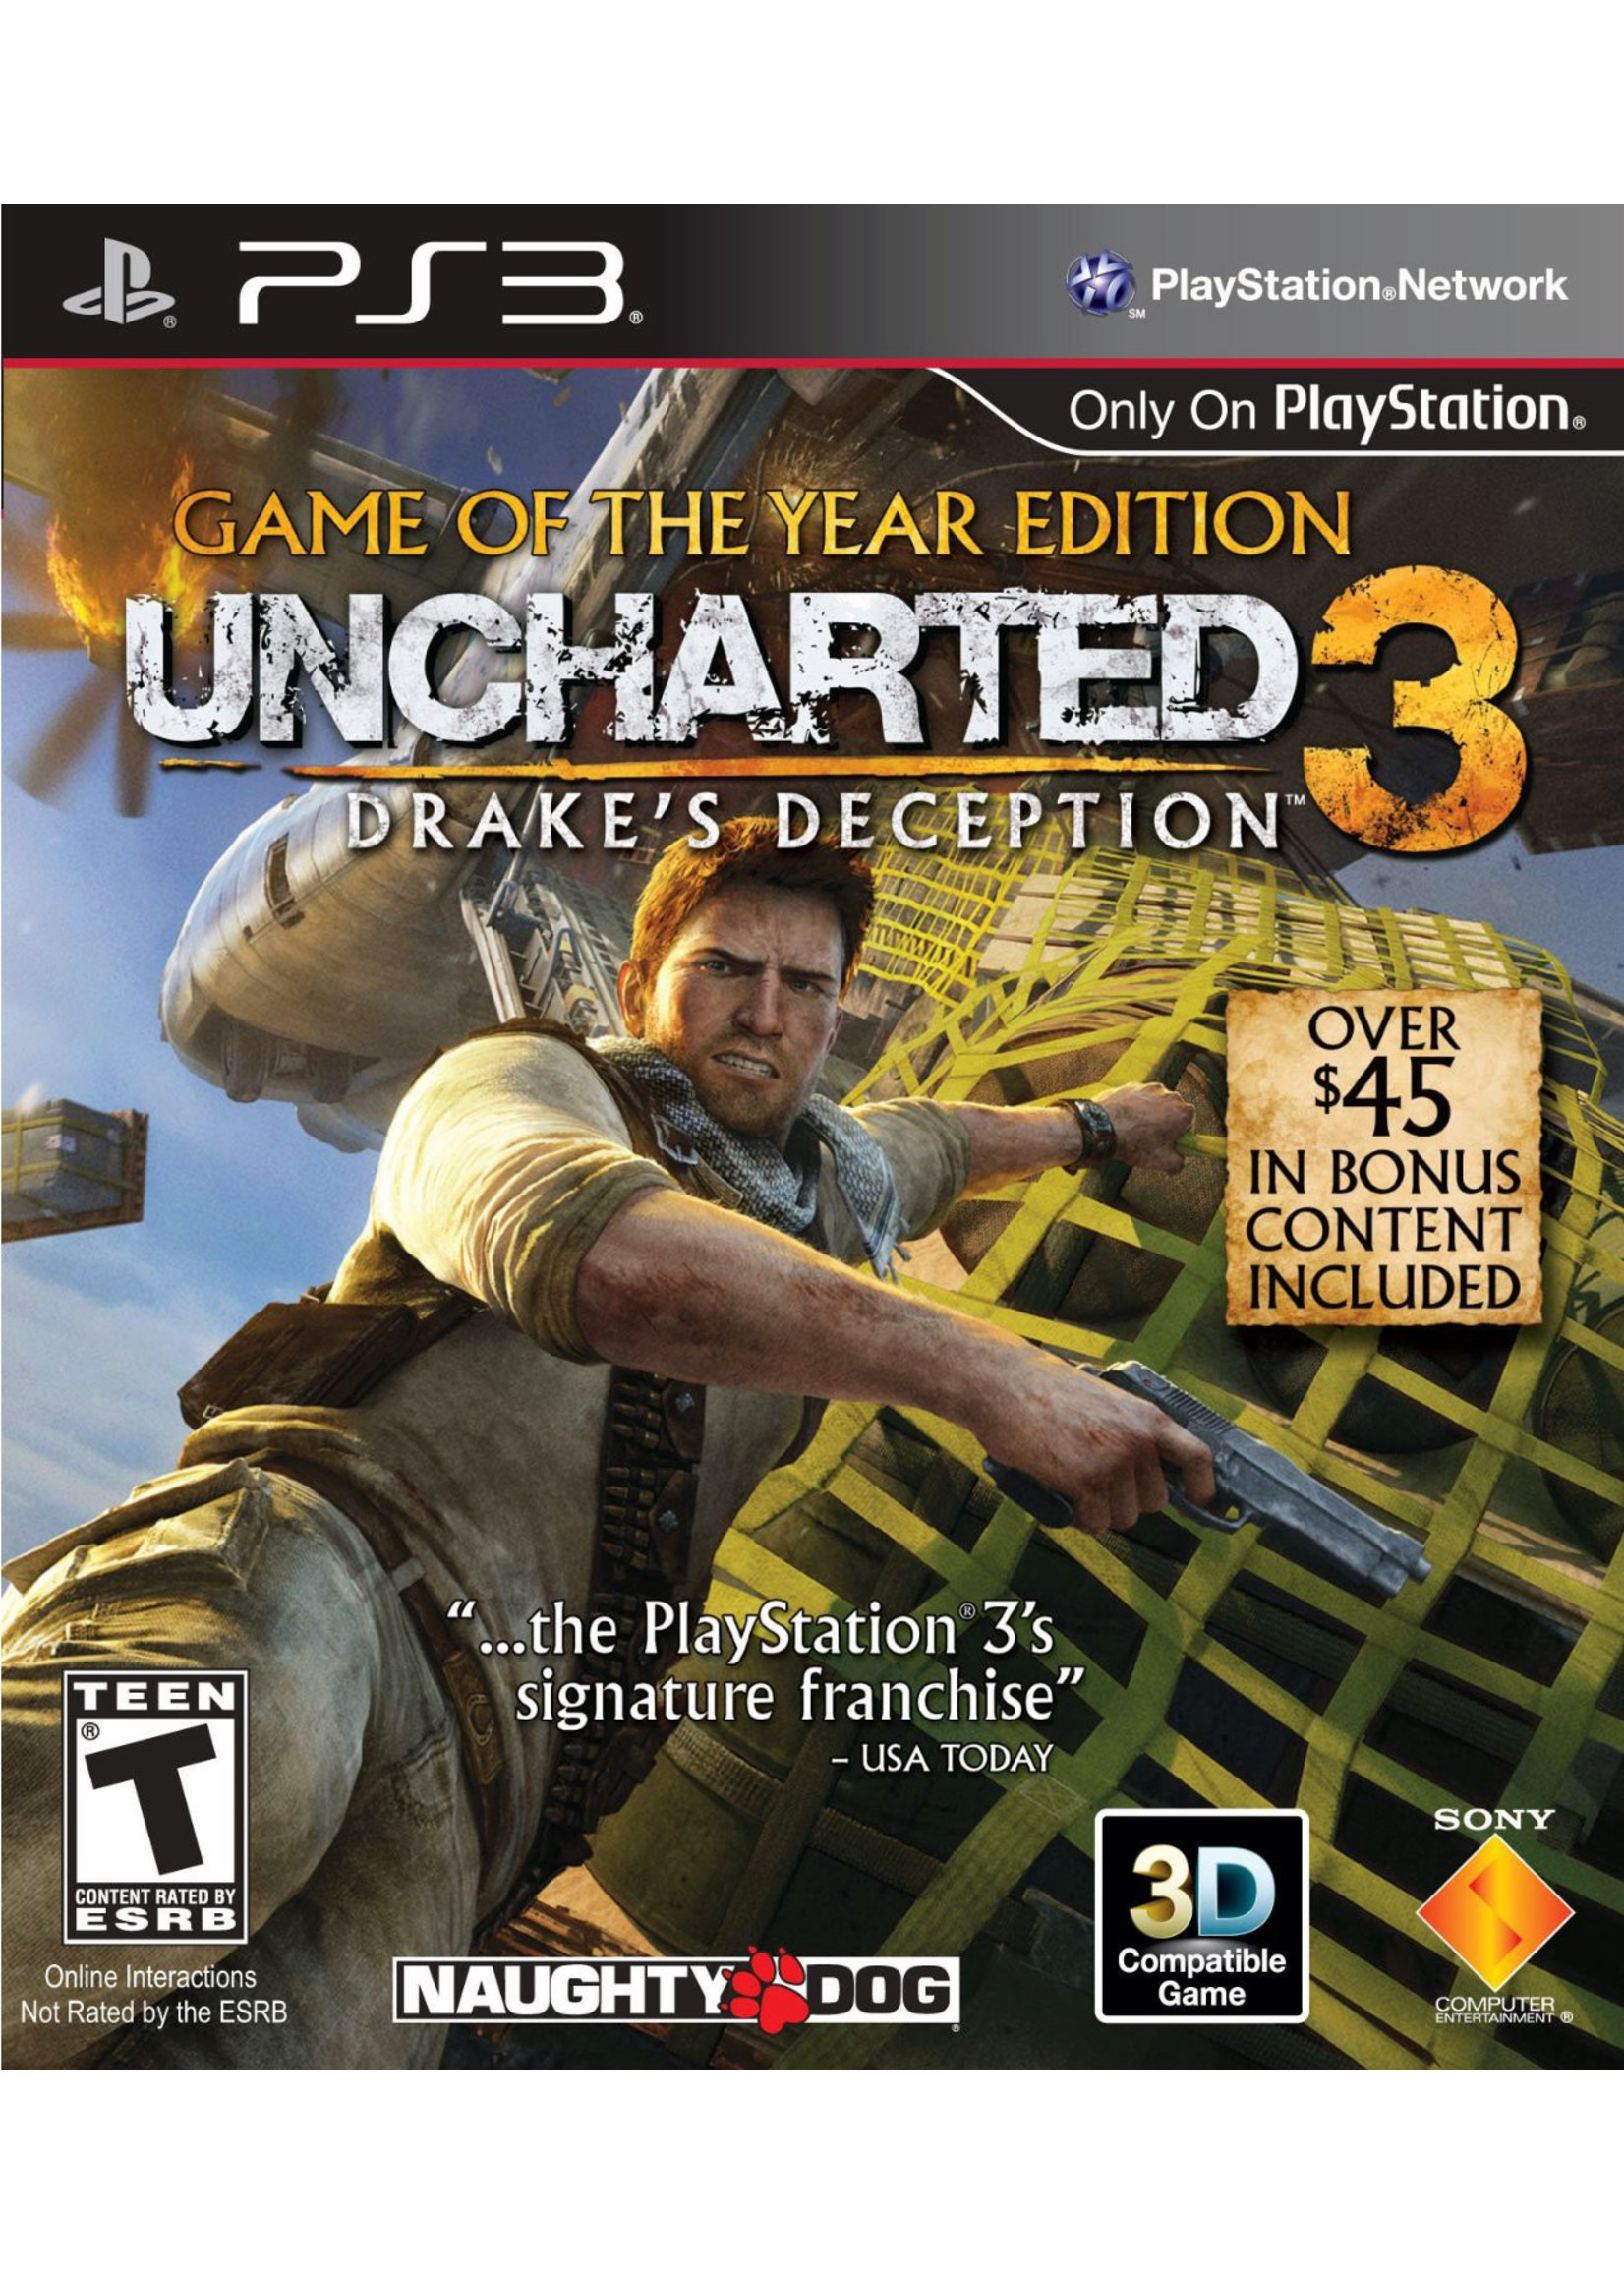 Sony Playstation 3 (PS3) Uncharted 3 Game of the Year Edition